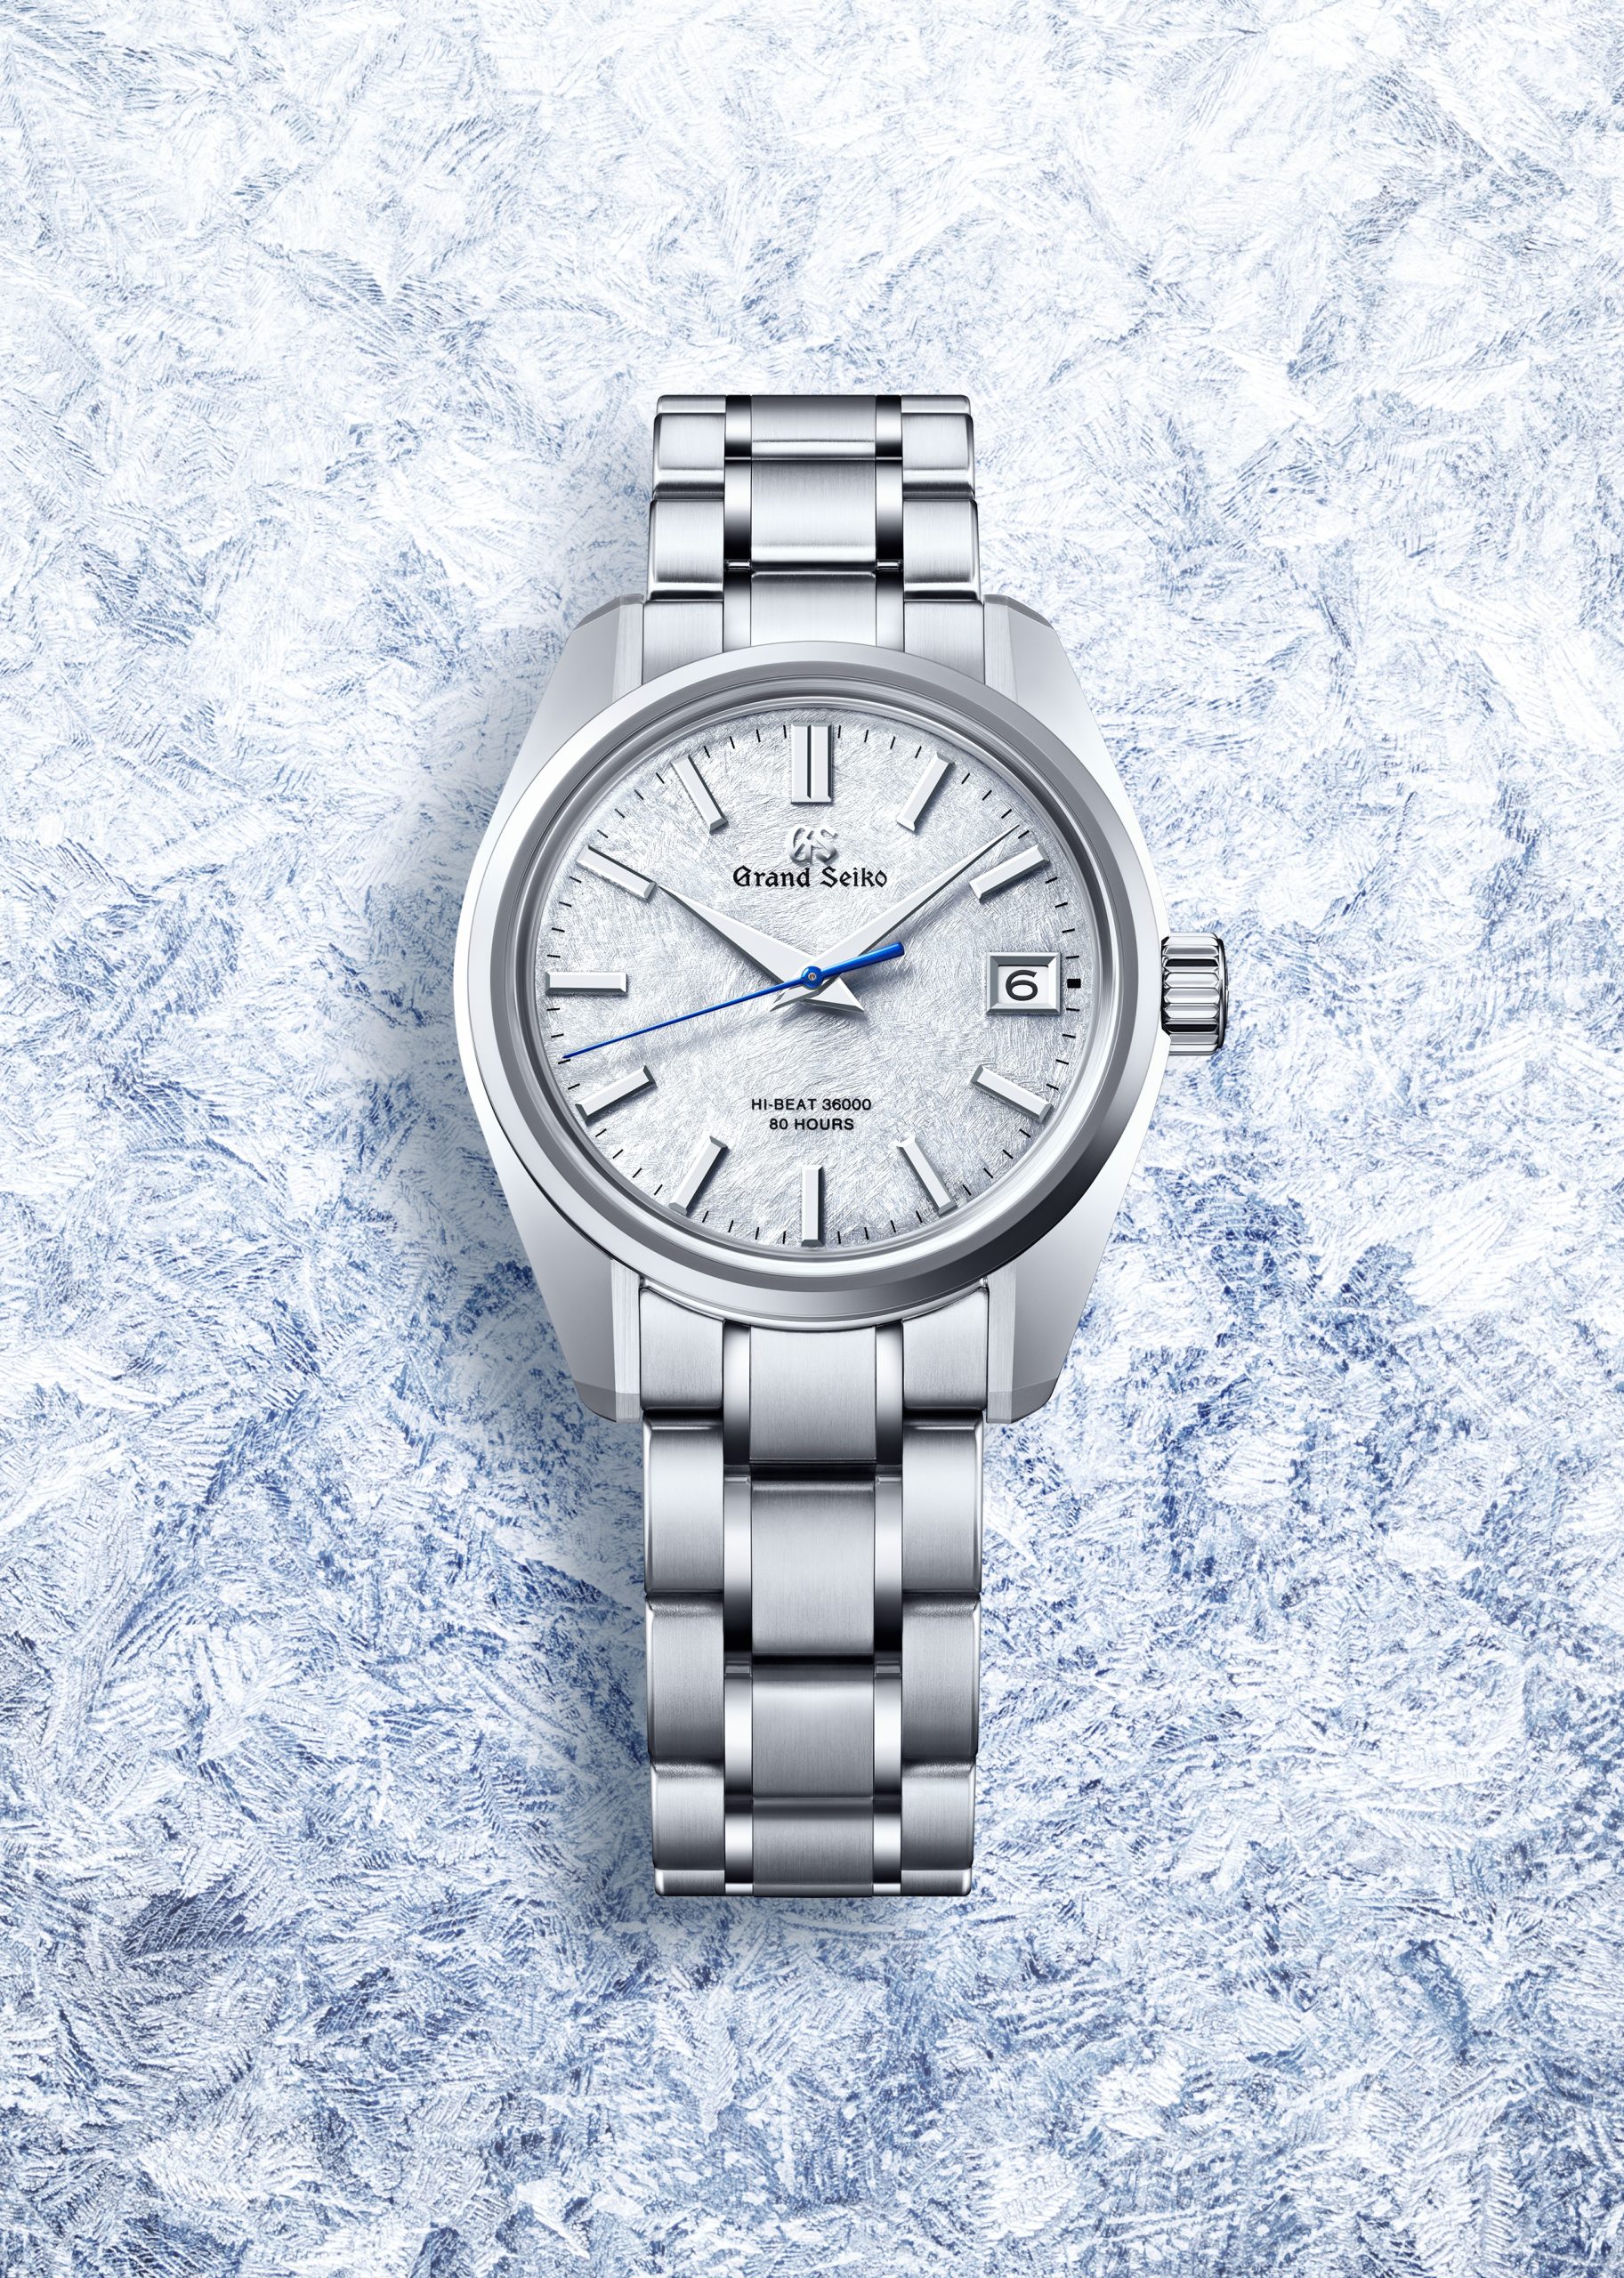 Grand Seiko Heritage Collection SLGH013: Poetry Meets Technology -  ATimelyPerspective